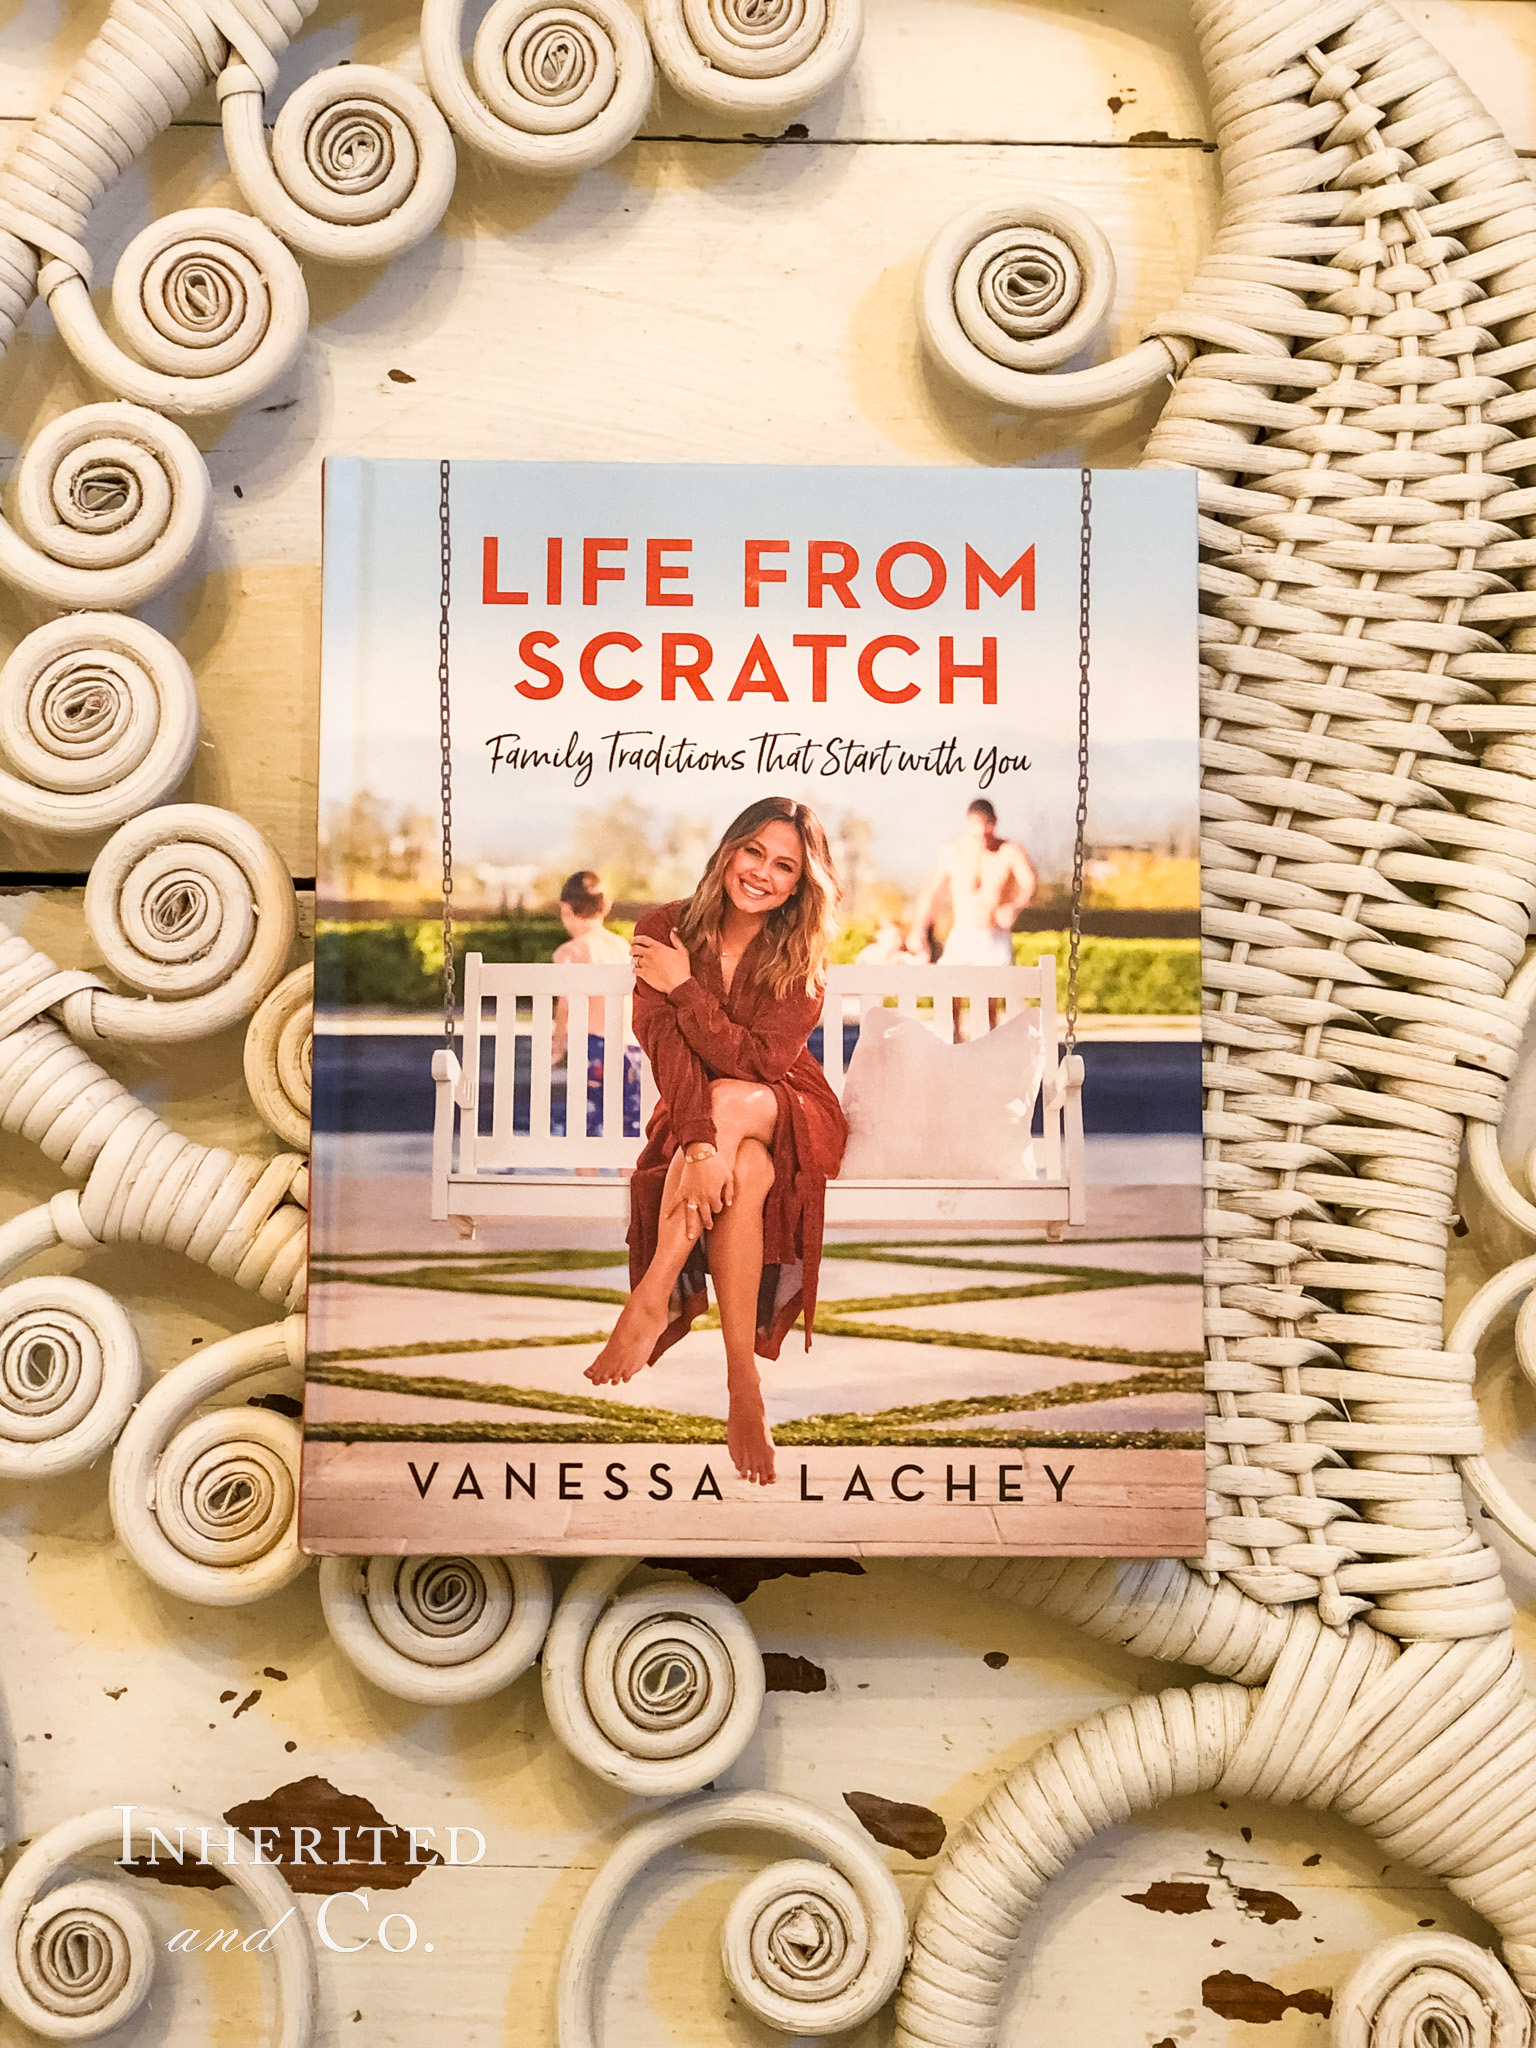 Vanessa Lachey's book, Life from Scratch, laid on vintage white wicker